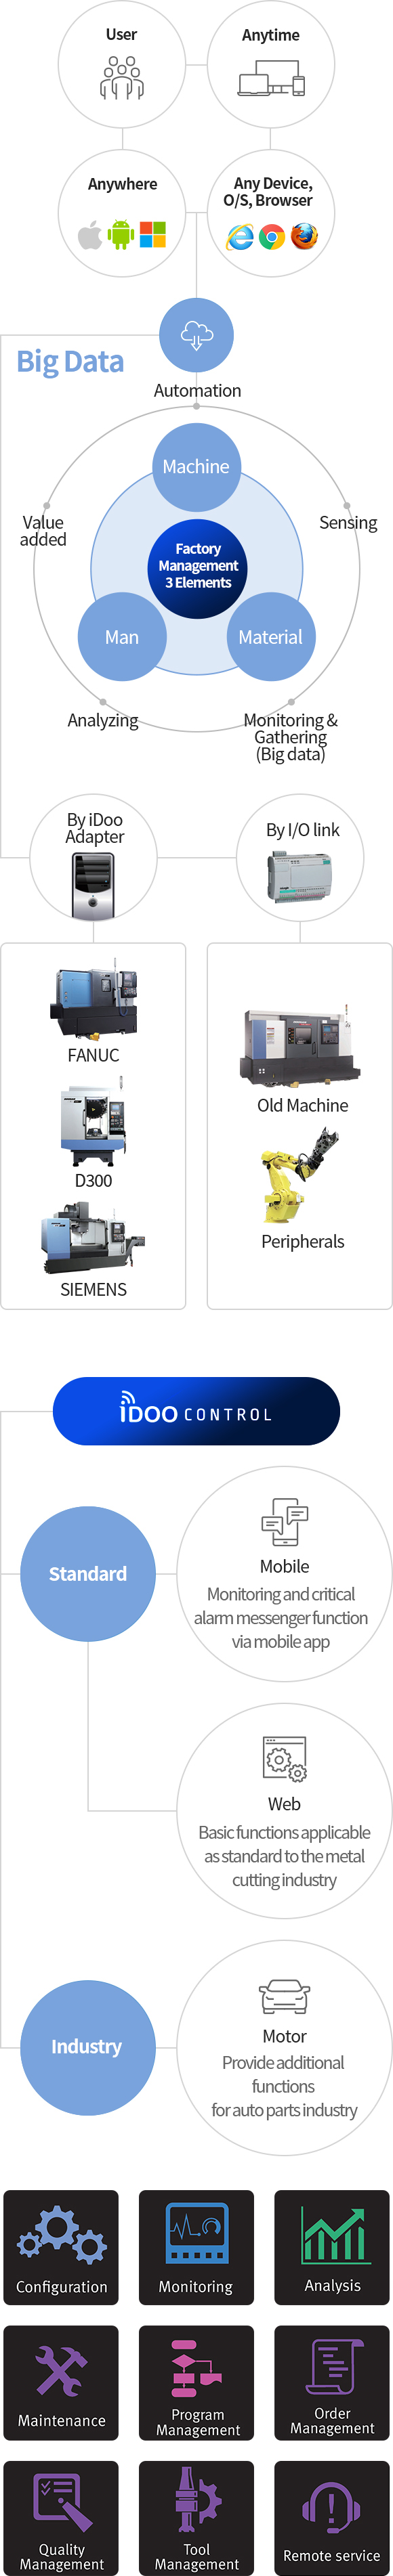 user, anytime, anywhere, any Device, O/S, Browser , Big Data - value added, automation, sensing, monitoring and gathering(big data) , Analyzing, Factory Management 3 Elements - machine, man, Material / By iDOO Adapter - FANUC, D300, SIEMENS , By I/O link - Old Machine, Peripherals / iDOO CONTROL - 1. standard - Mobile(Monitoring and critical alarm messengerfunction via mobile app), Web(Basic functions applicable as standard to the metal cutting industry), 2. Industry Motor(Provide additional functions for auto parts industry) / Configuration, Monitoring, Analysis, Maintenance, Program Management, Order Management, Quality Management, Tool Management Remote service